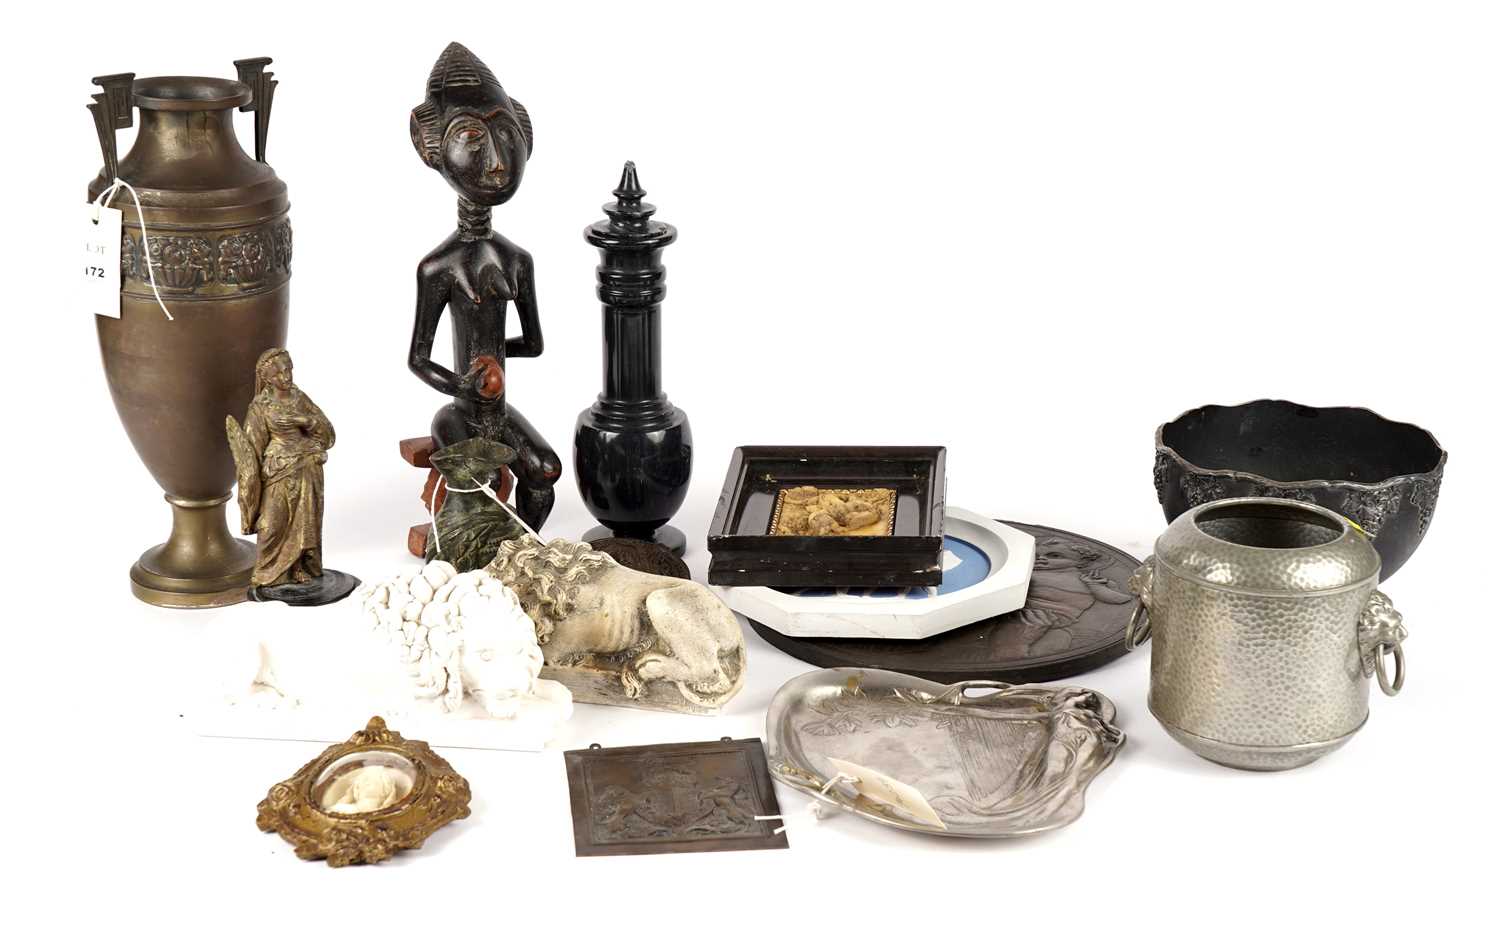 An Art Nouveau style pewter tray and other collectibles